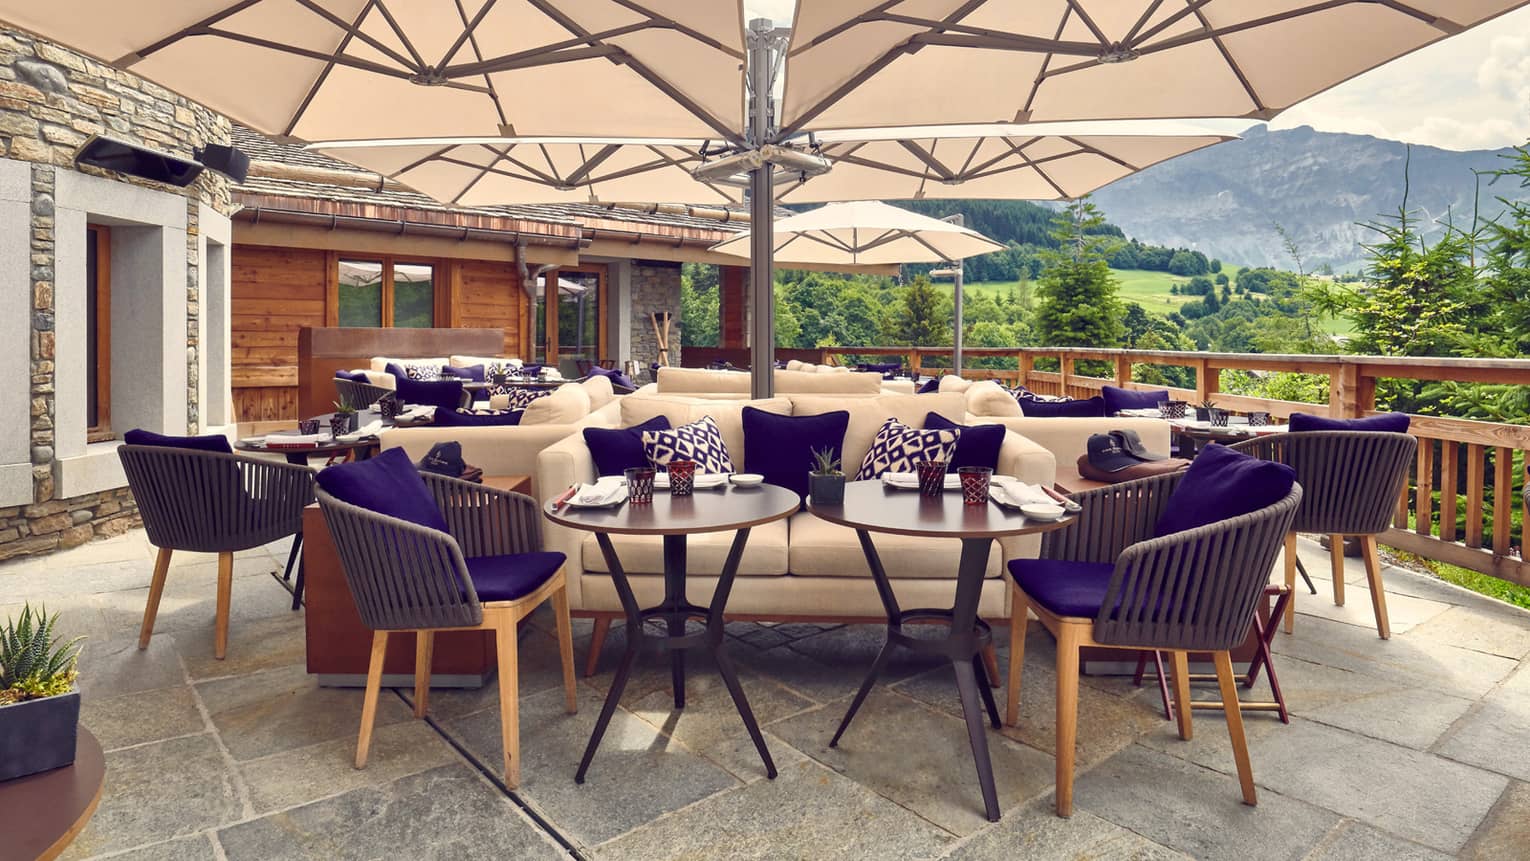 Restaurant flagstone terrace with tan and purple lounge seating under large tan umbrellas, mountain views behind